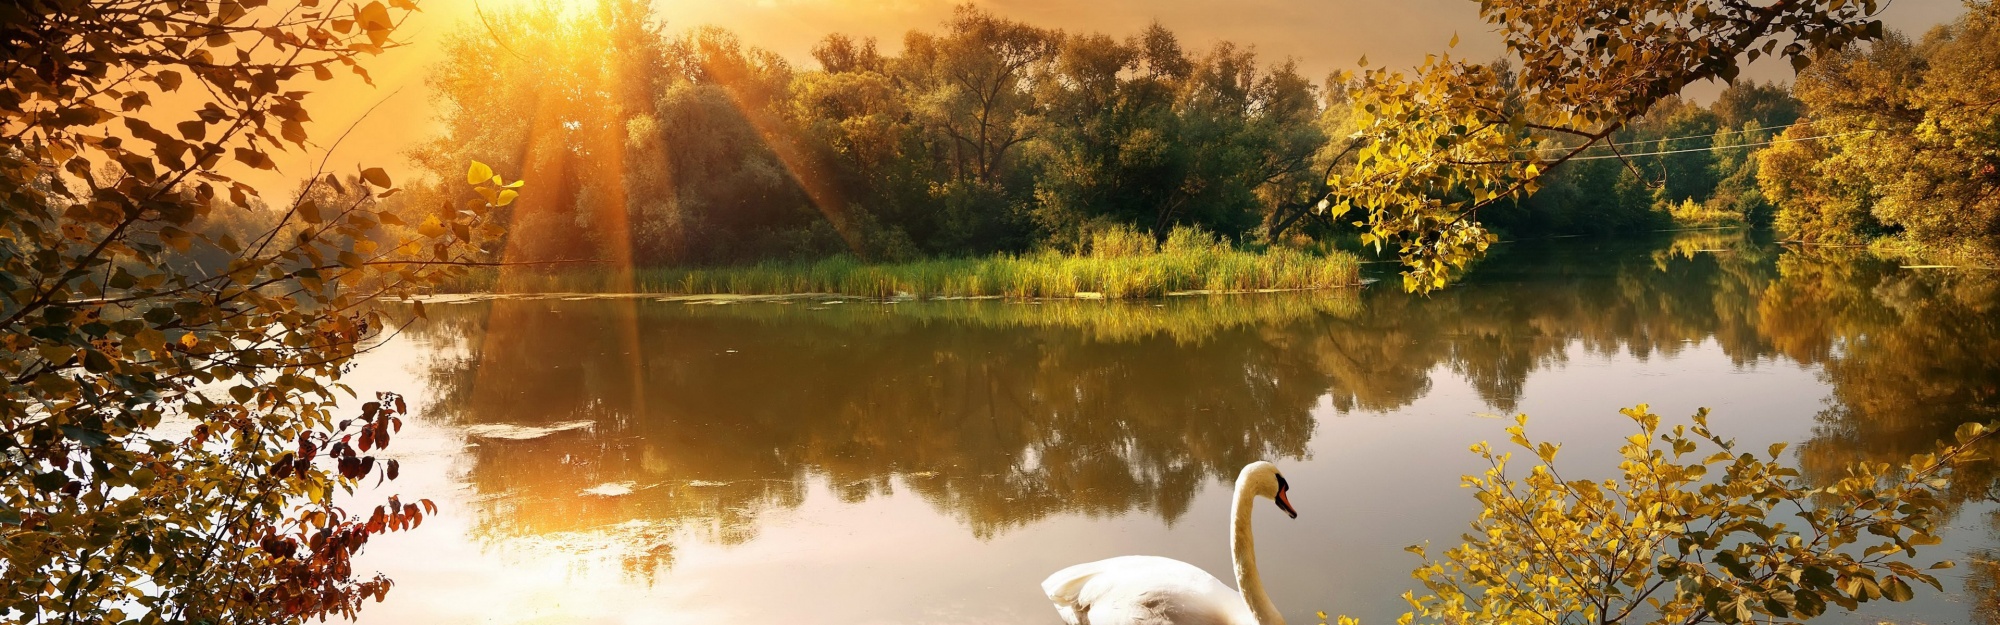 Swan On The Lake In Autumn